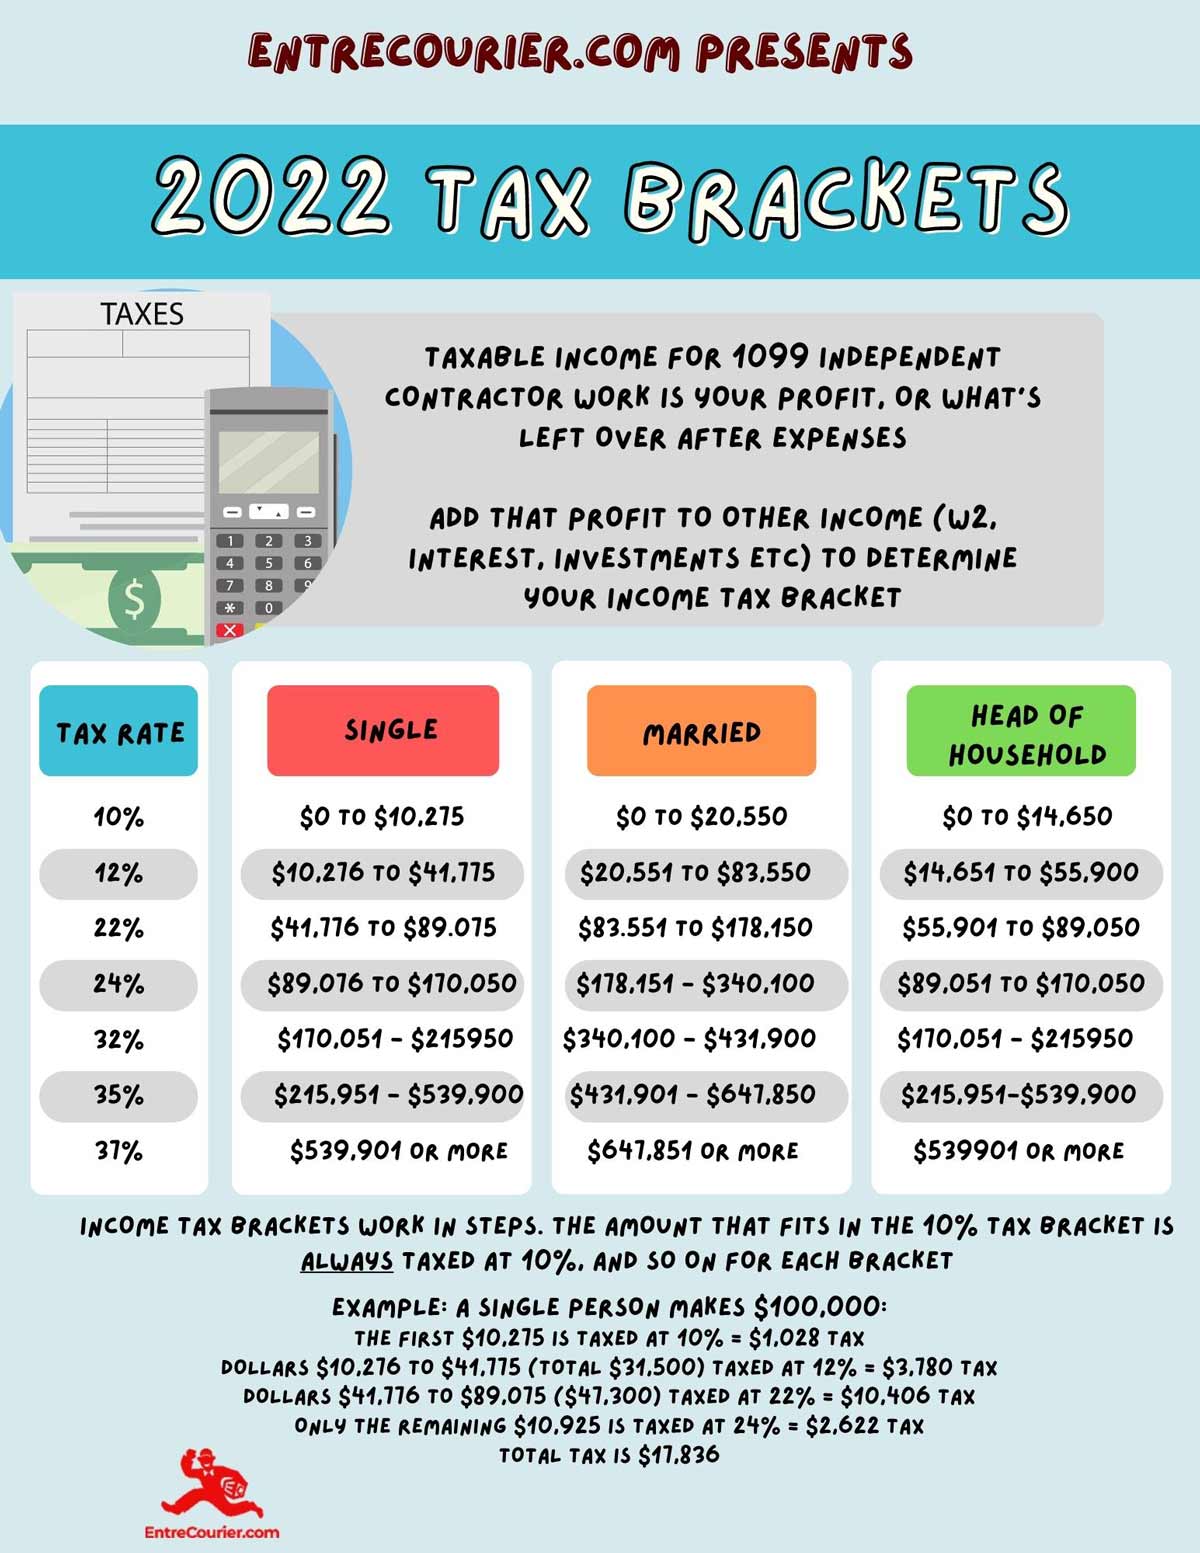 Infographic of 2022 tax brackets stating that taxable income for 1099 independent contractor work is profit, and profit added to other income determines the tax bracket.